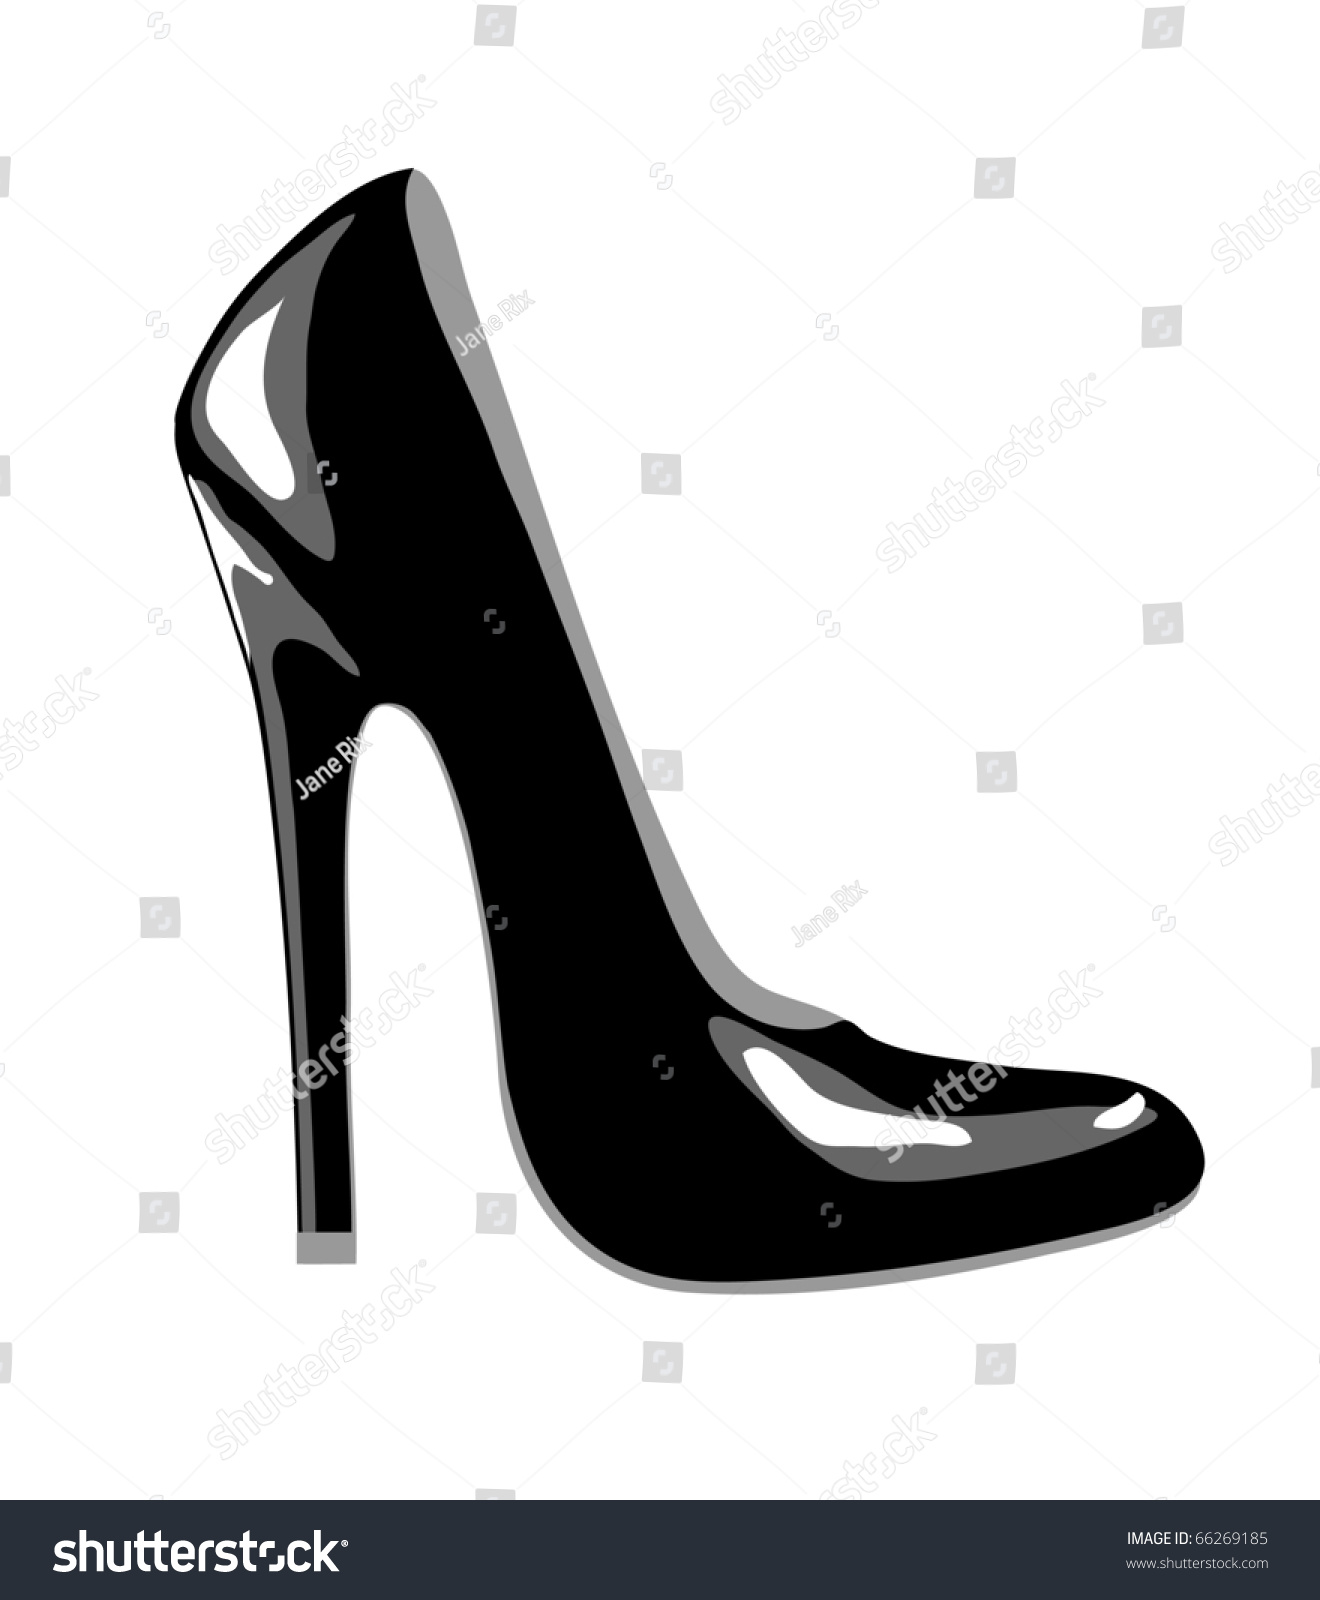 A High-Heeled Black Court Shoe For Business Or Party Wear ...